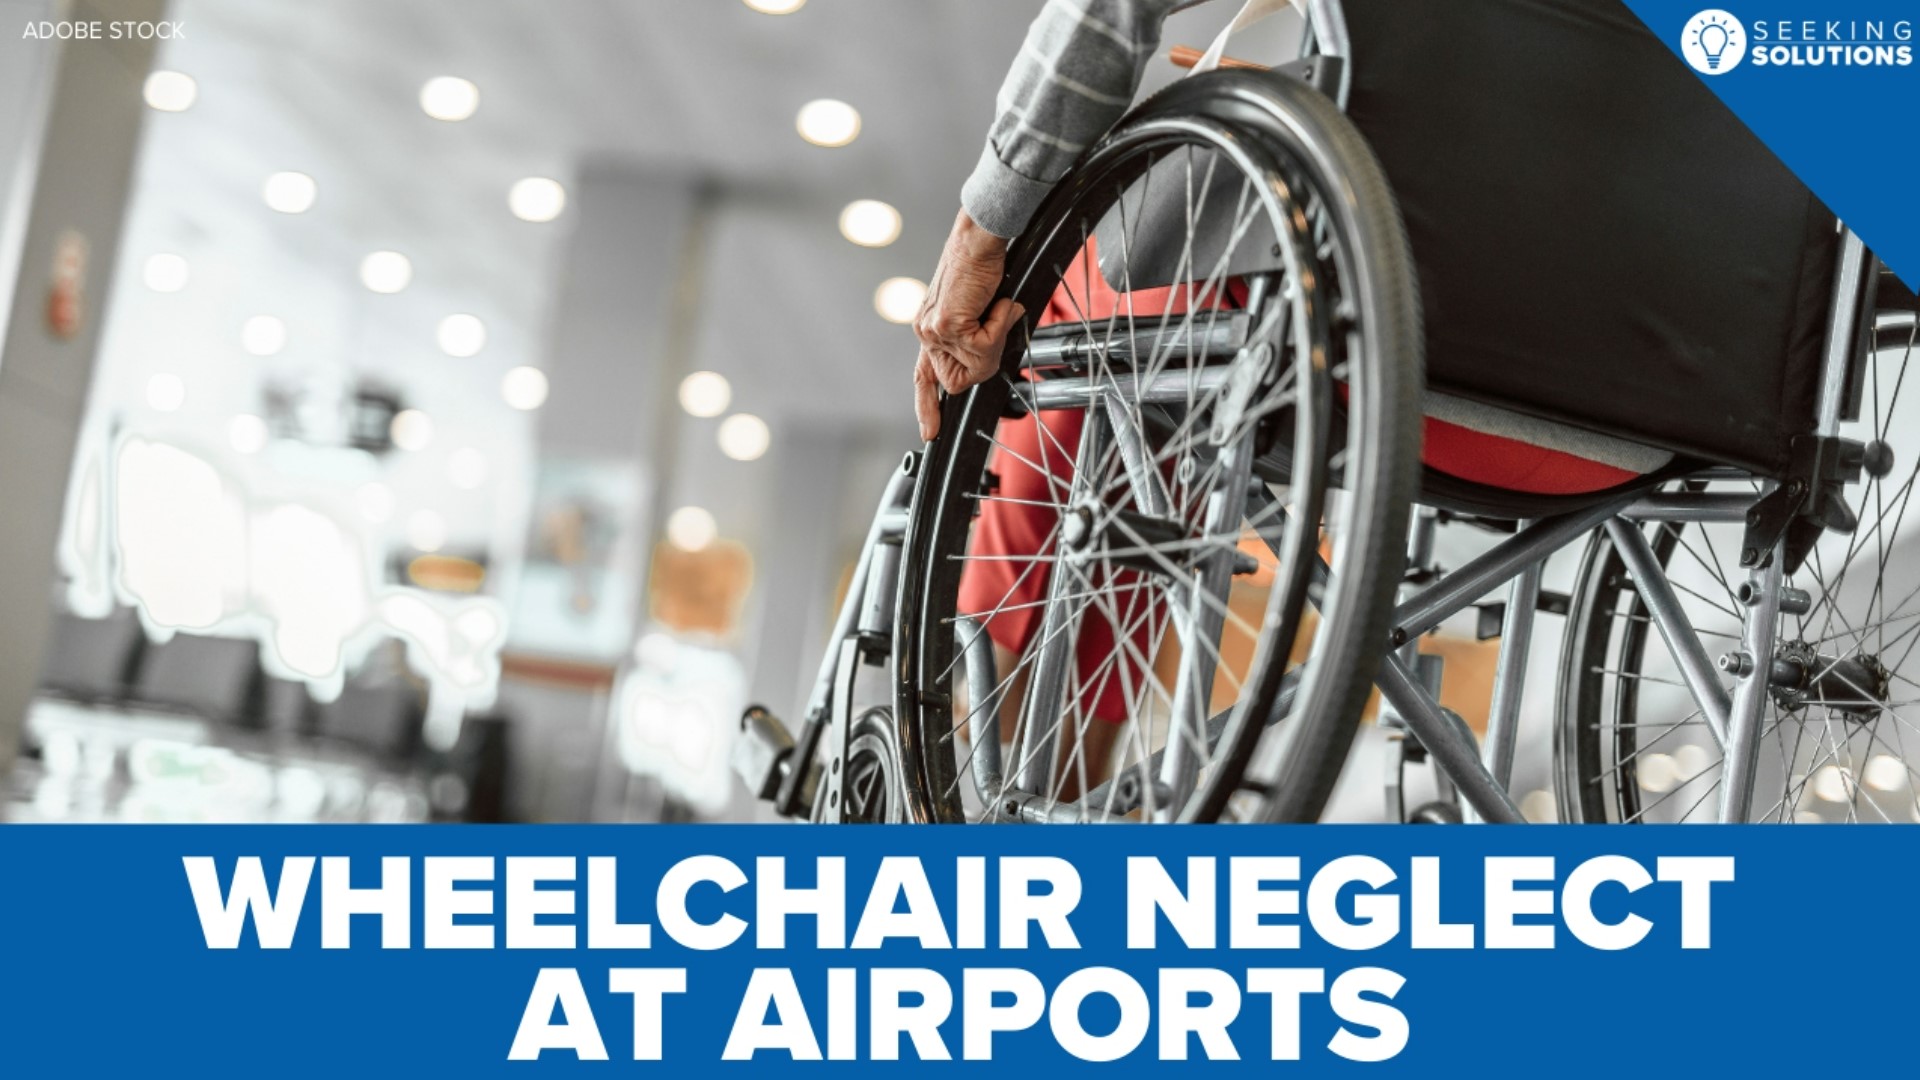 Lawmakers are calling Congress to do its part as they seek to prevent ongoing discrimination against airline travelers with disabilities.